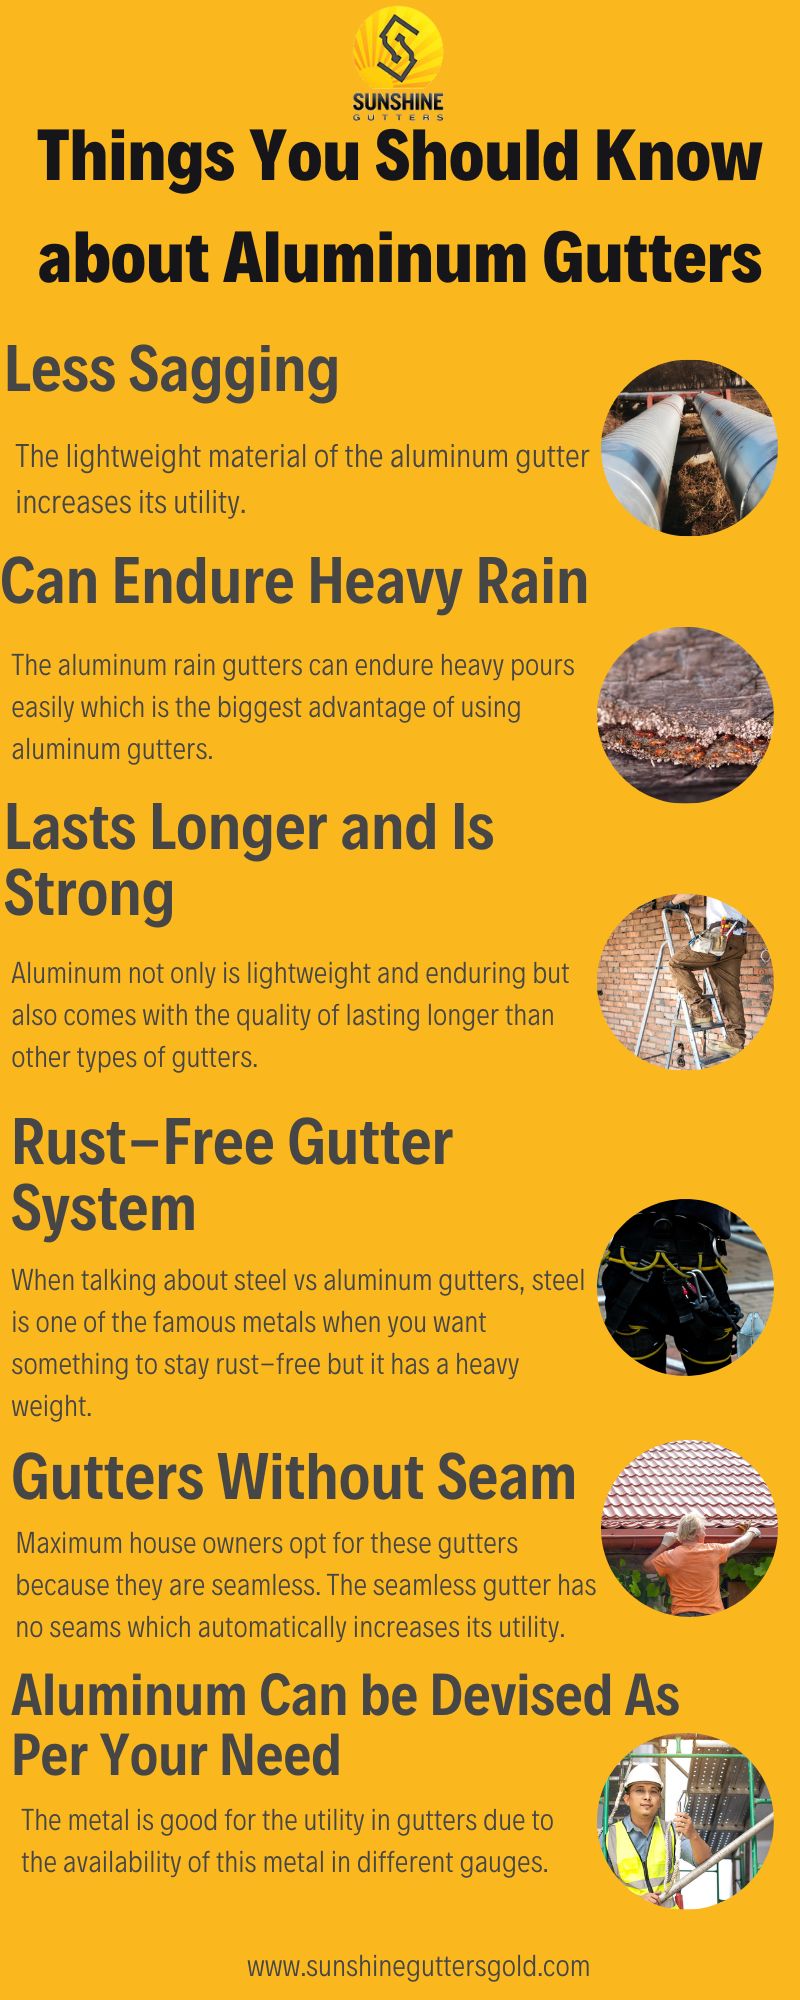 Things You Should Know about Aluminum Gutters